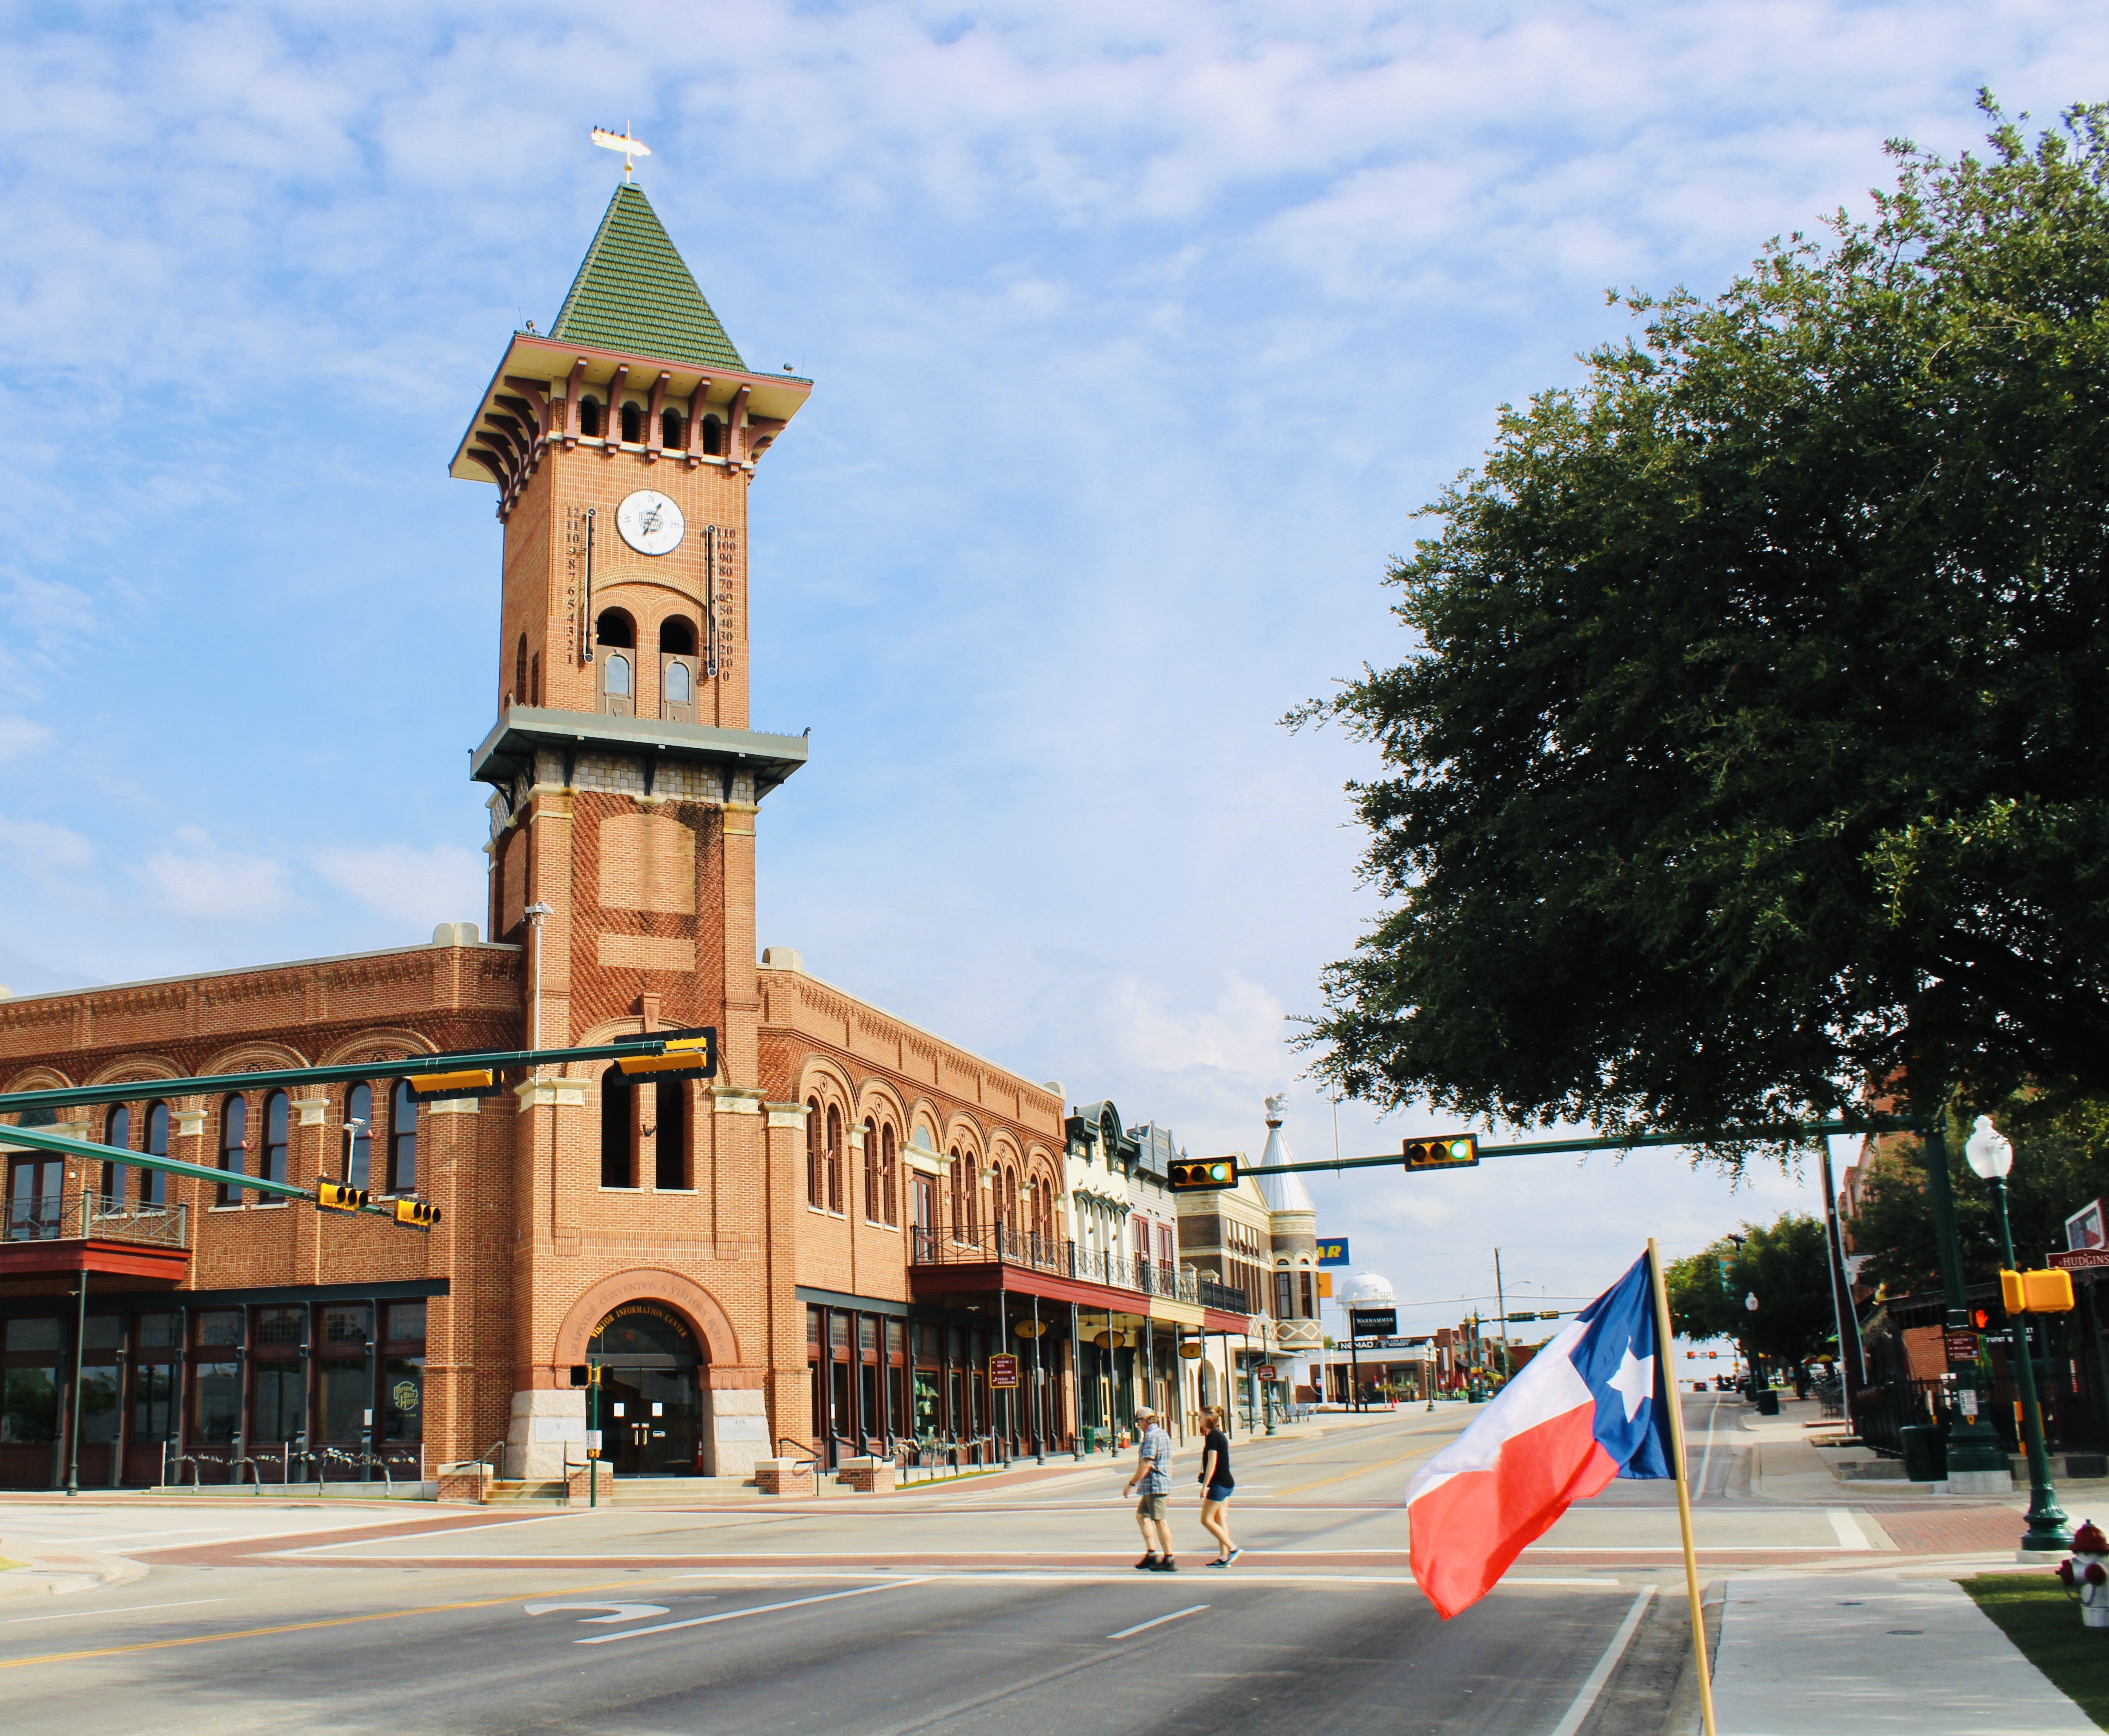 Main Entrance of the historical main street in grapevine. 